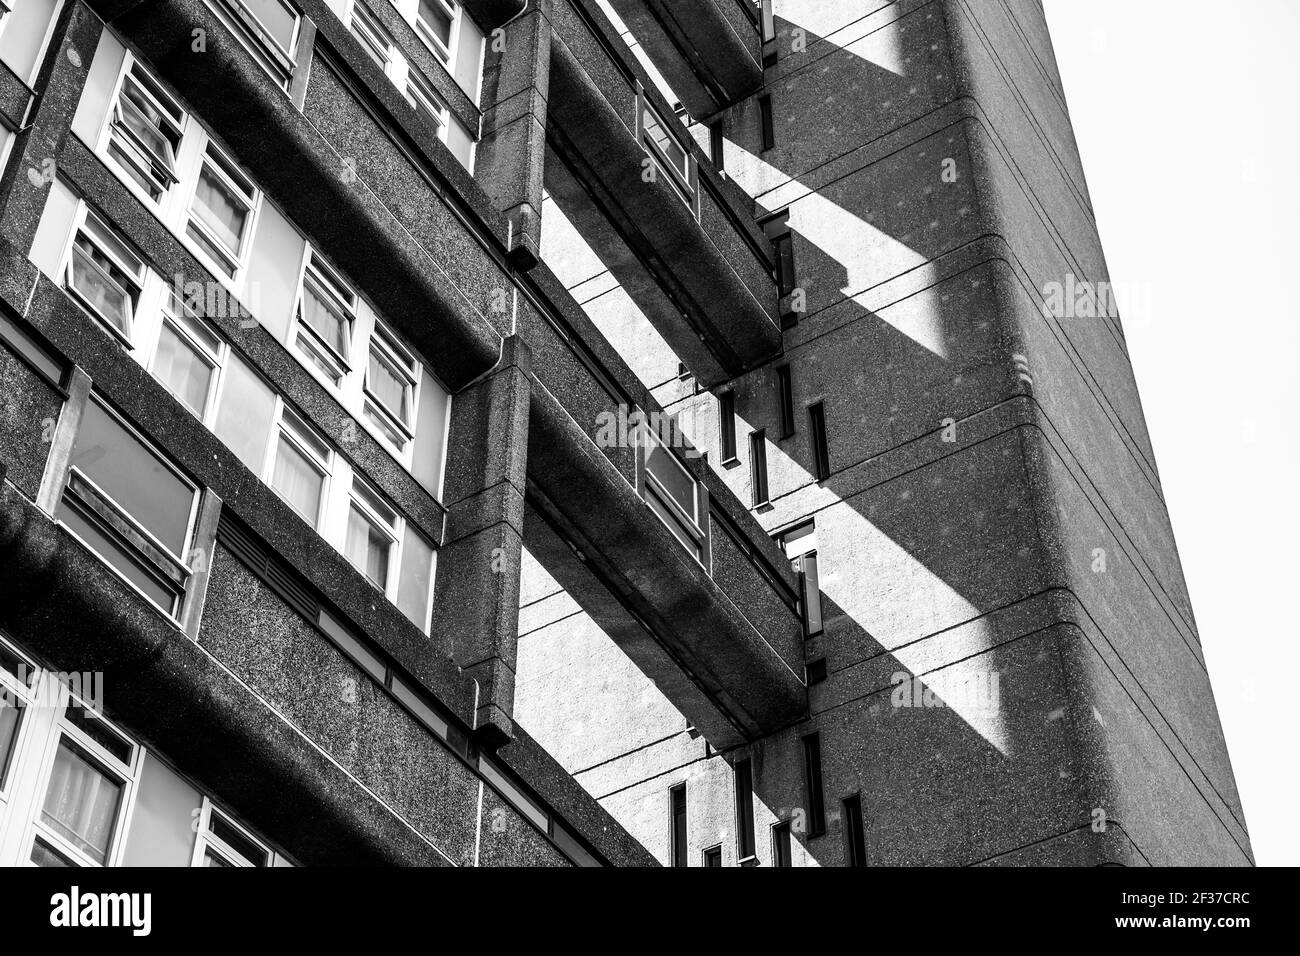 Brutalist style residential high-rise Trellick Tower by architect Ernő Goldfinger, London, UK Stock Photo